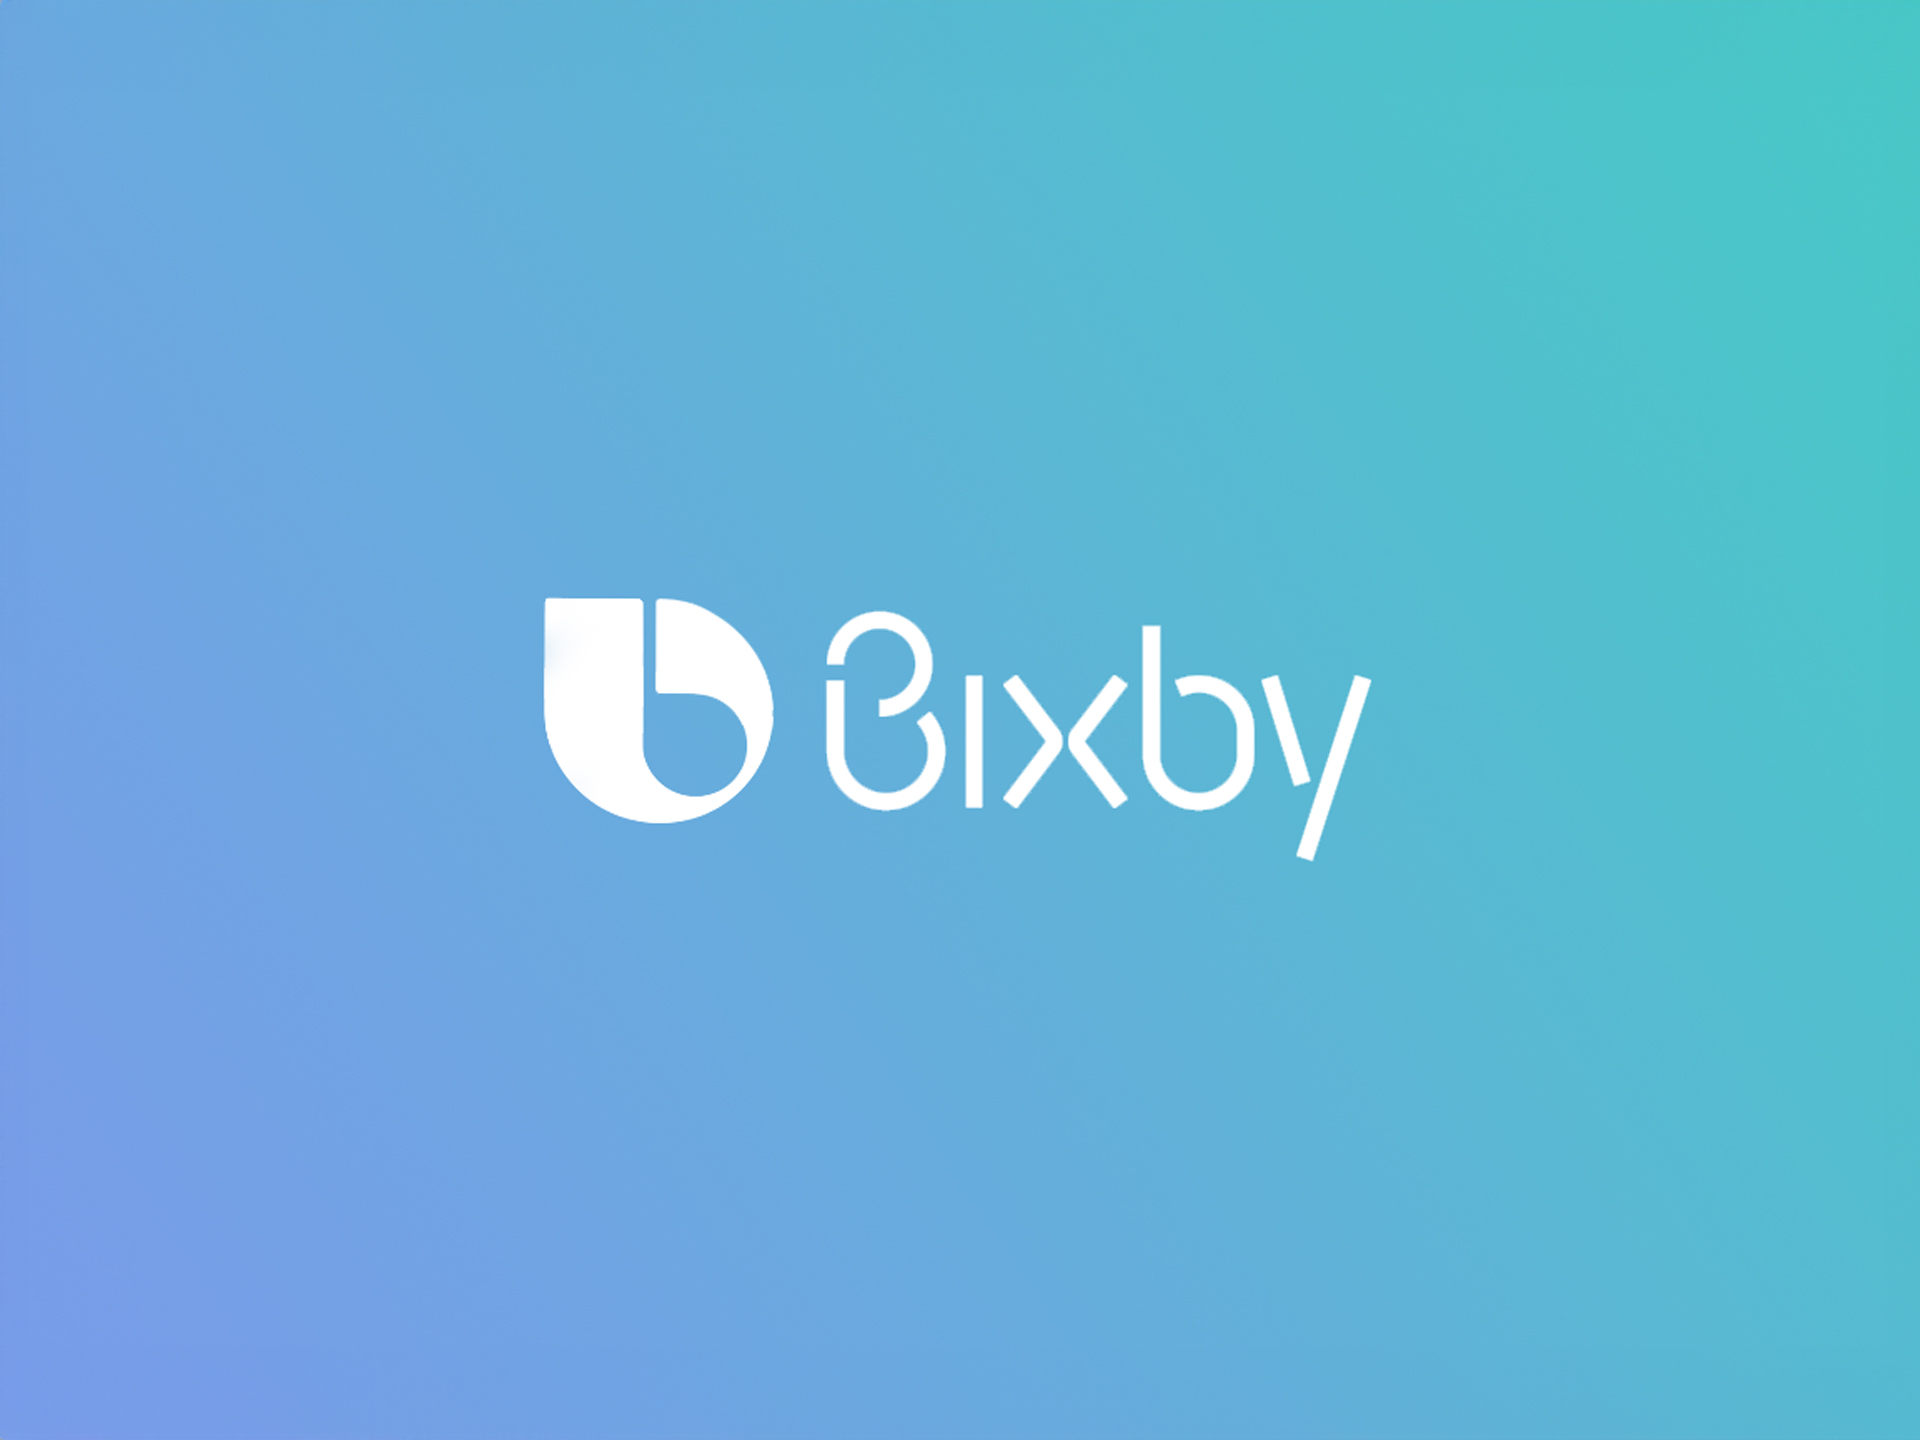 Do you use Bixby?  It could soon become more useful, but Samsung needs to hurry up